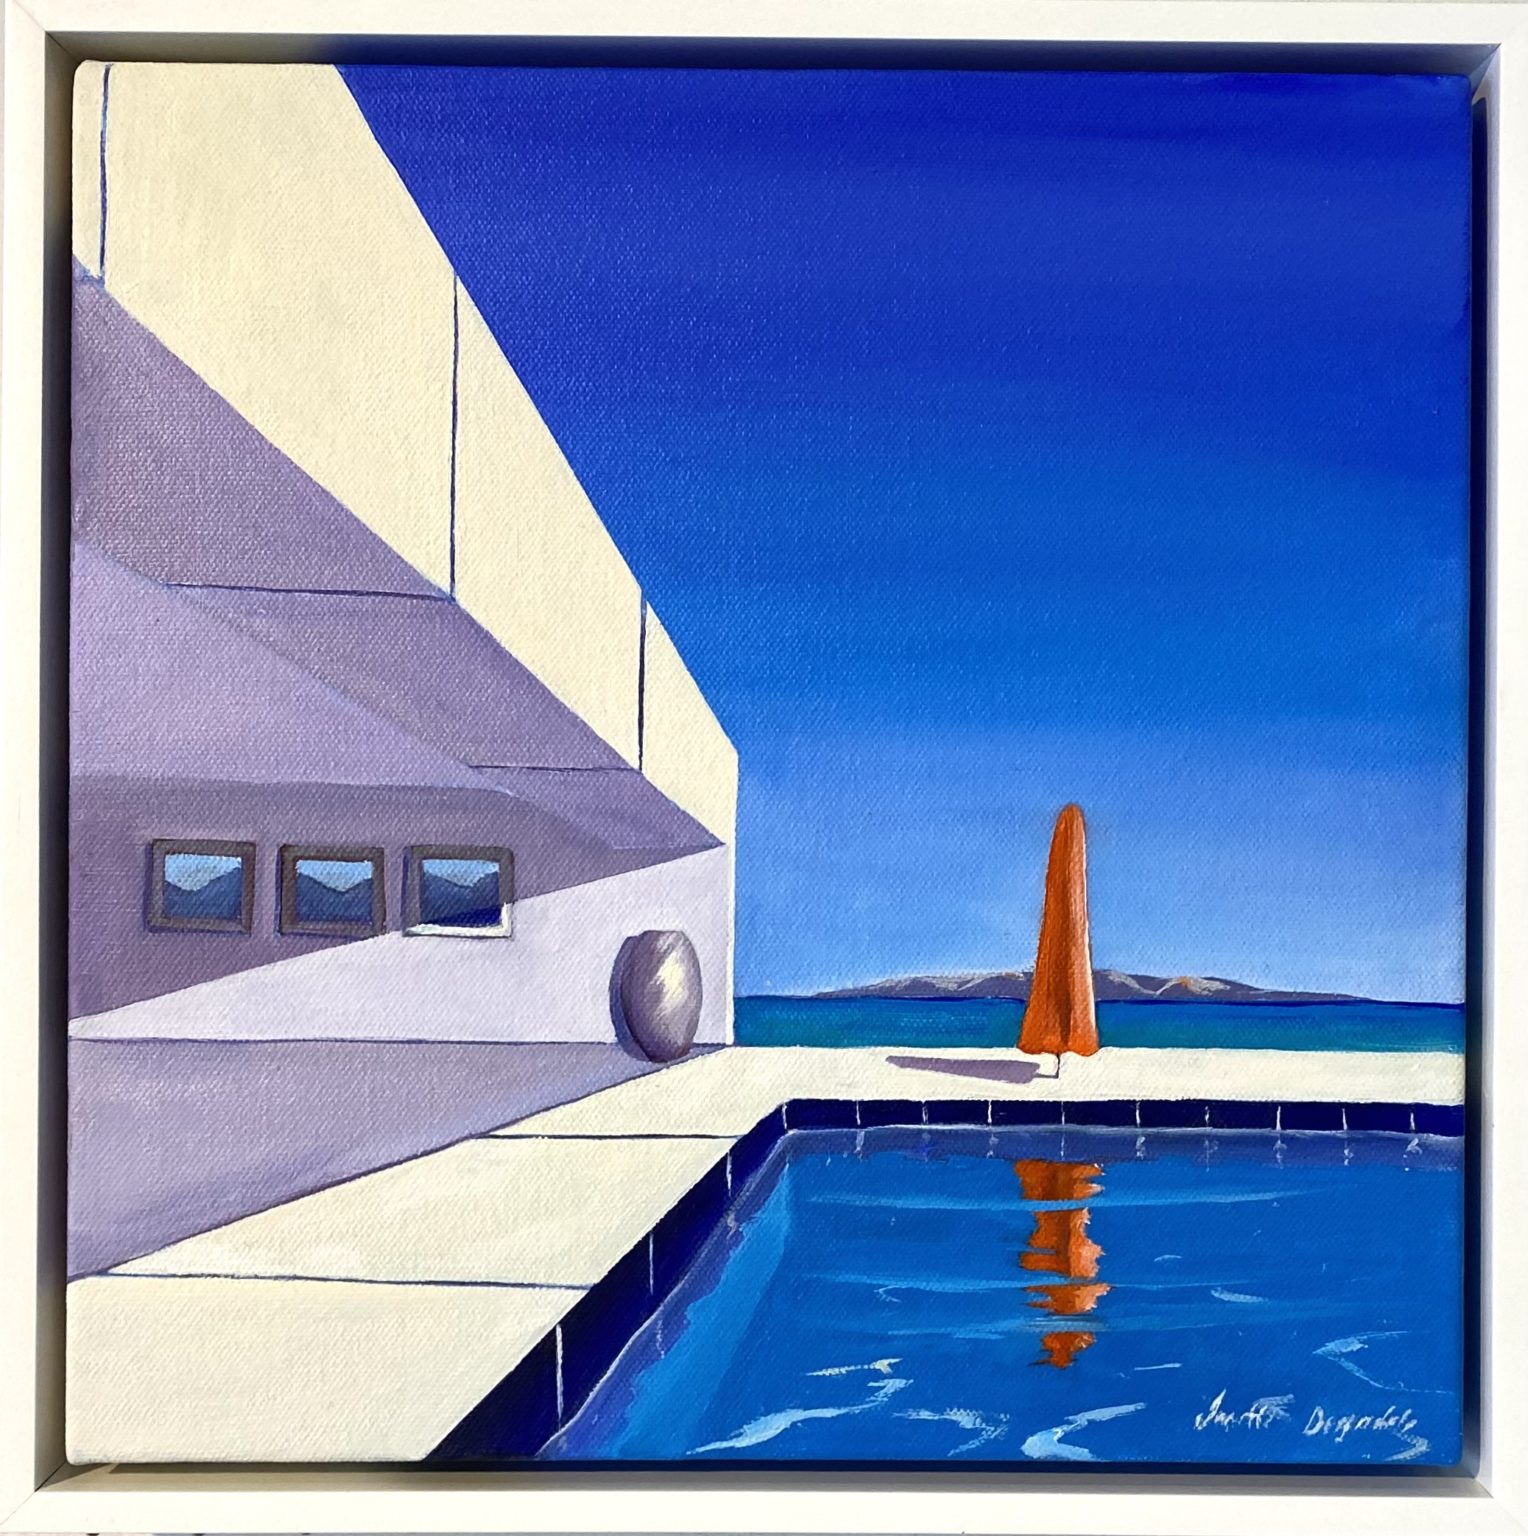 Janette Drysdale's "Pool Perspective 1" oil painting product